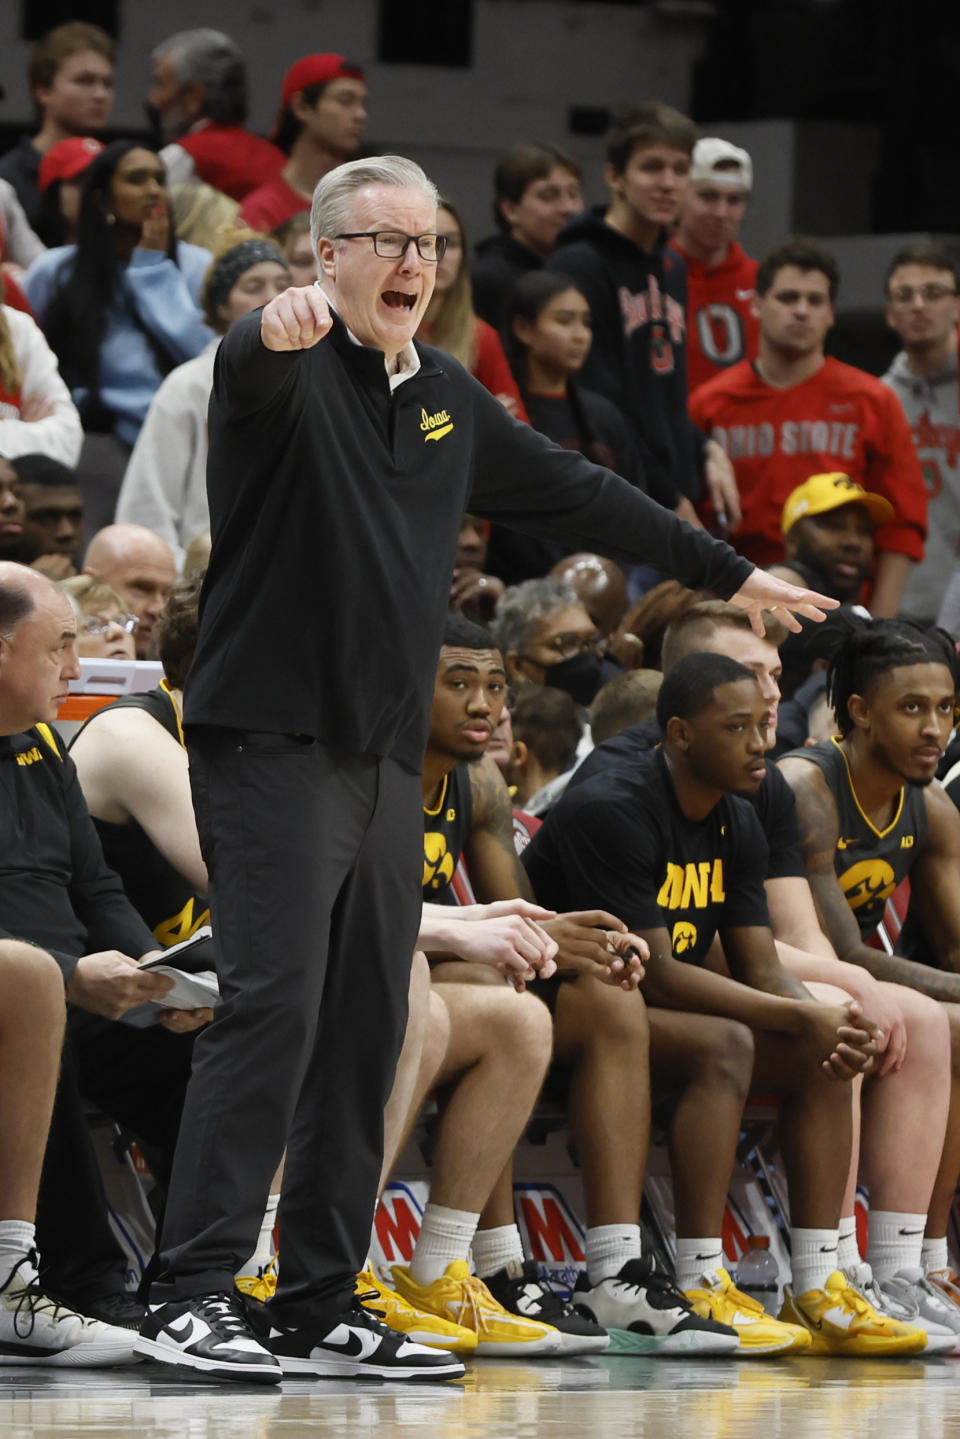 Iowa head coach Fran McCaffery instructs his team against Ohio State during the second half of an NCAA college basketball game on Saturday, Jan. 21, 2023, in Columbus, Ohio. (AP Photo/Jay LaPrete)